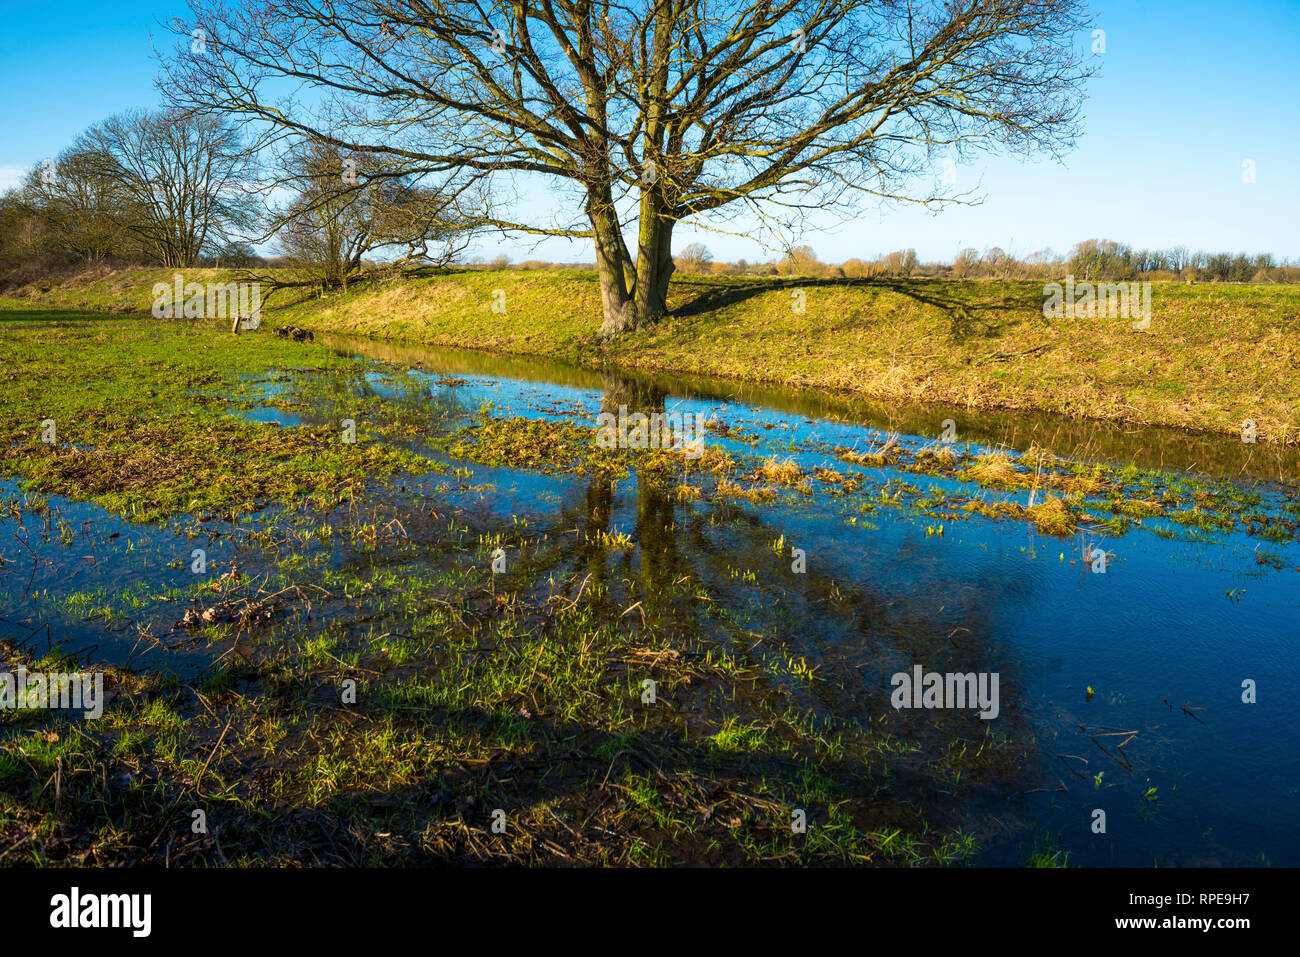 Flooded meadow linking Houghton and Hemingford Abbots villages, Cambridgeshire, England, UK. Stock Photo